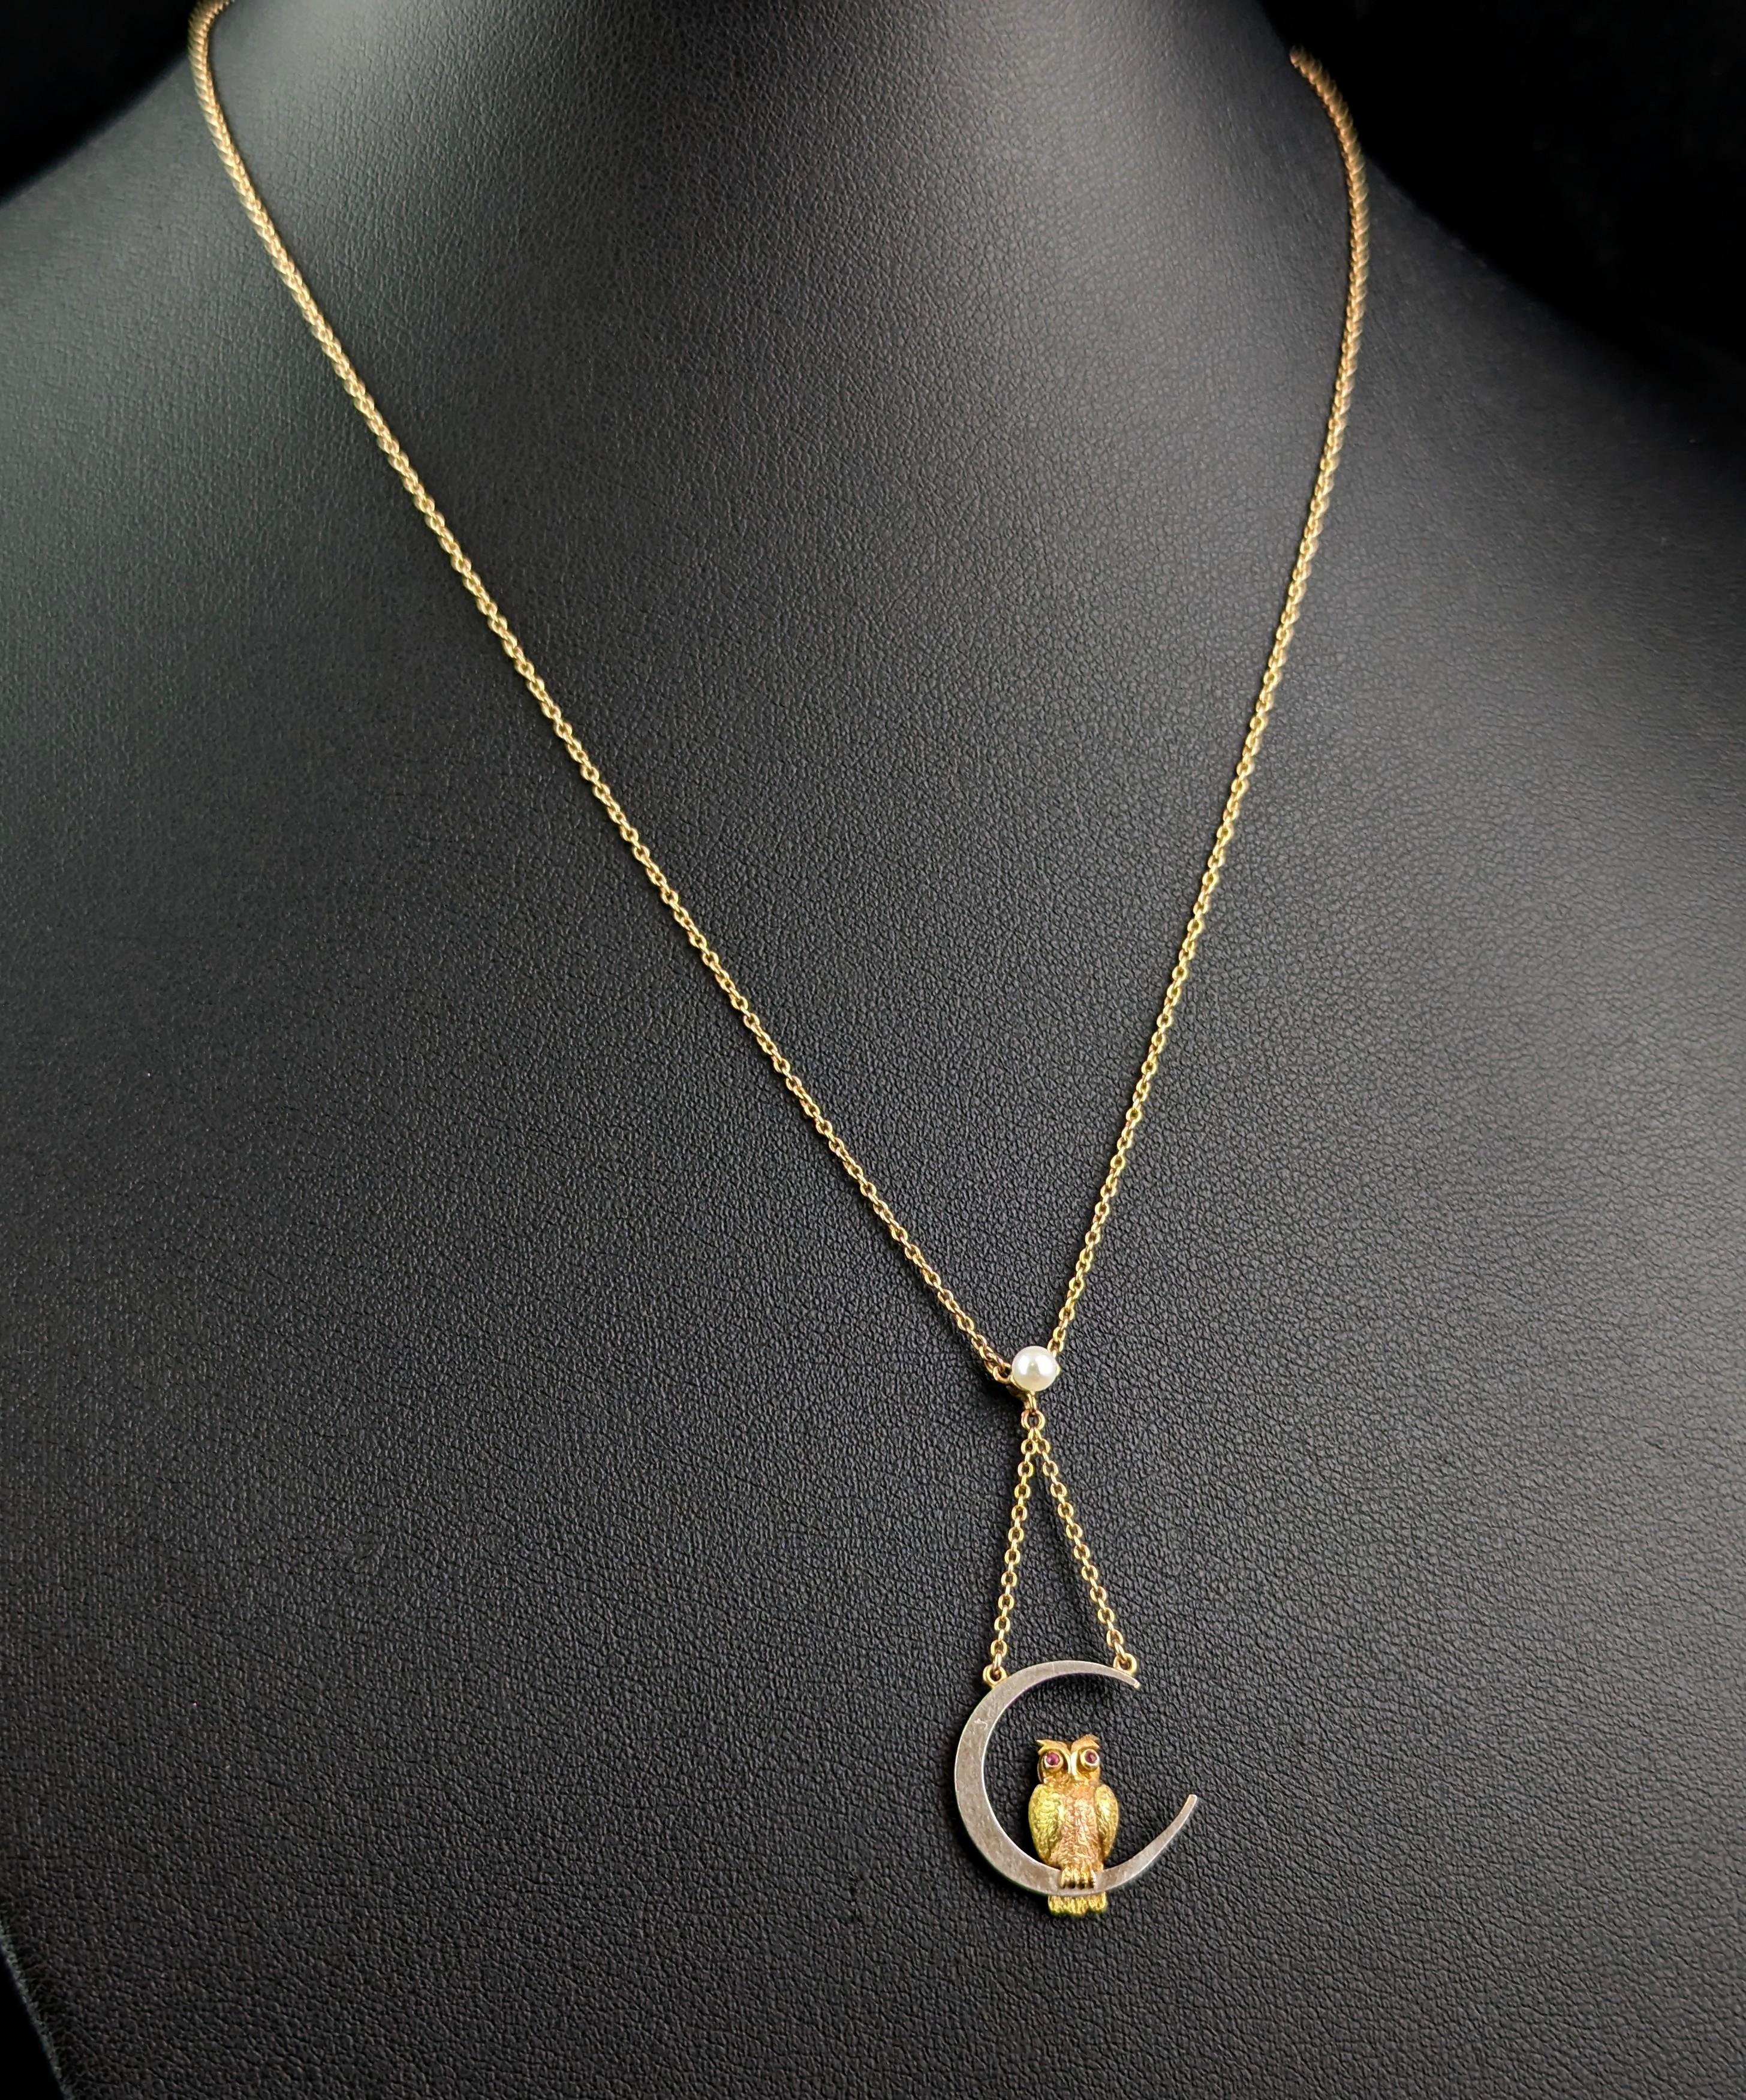 Edwardian Antique Owl and Crescent moon pendant necklace, 15k gold and platinum, Ruby For Sale